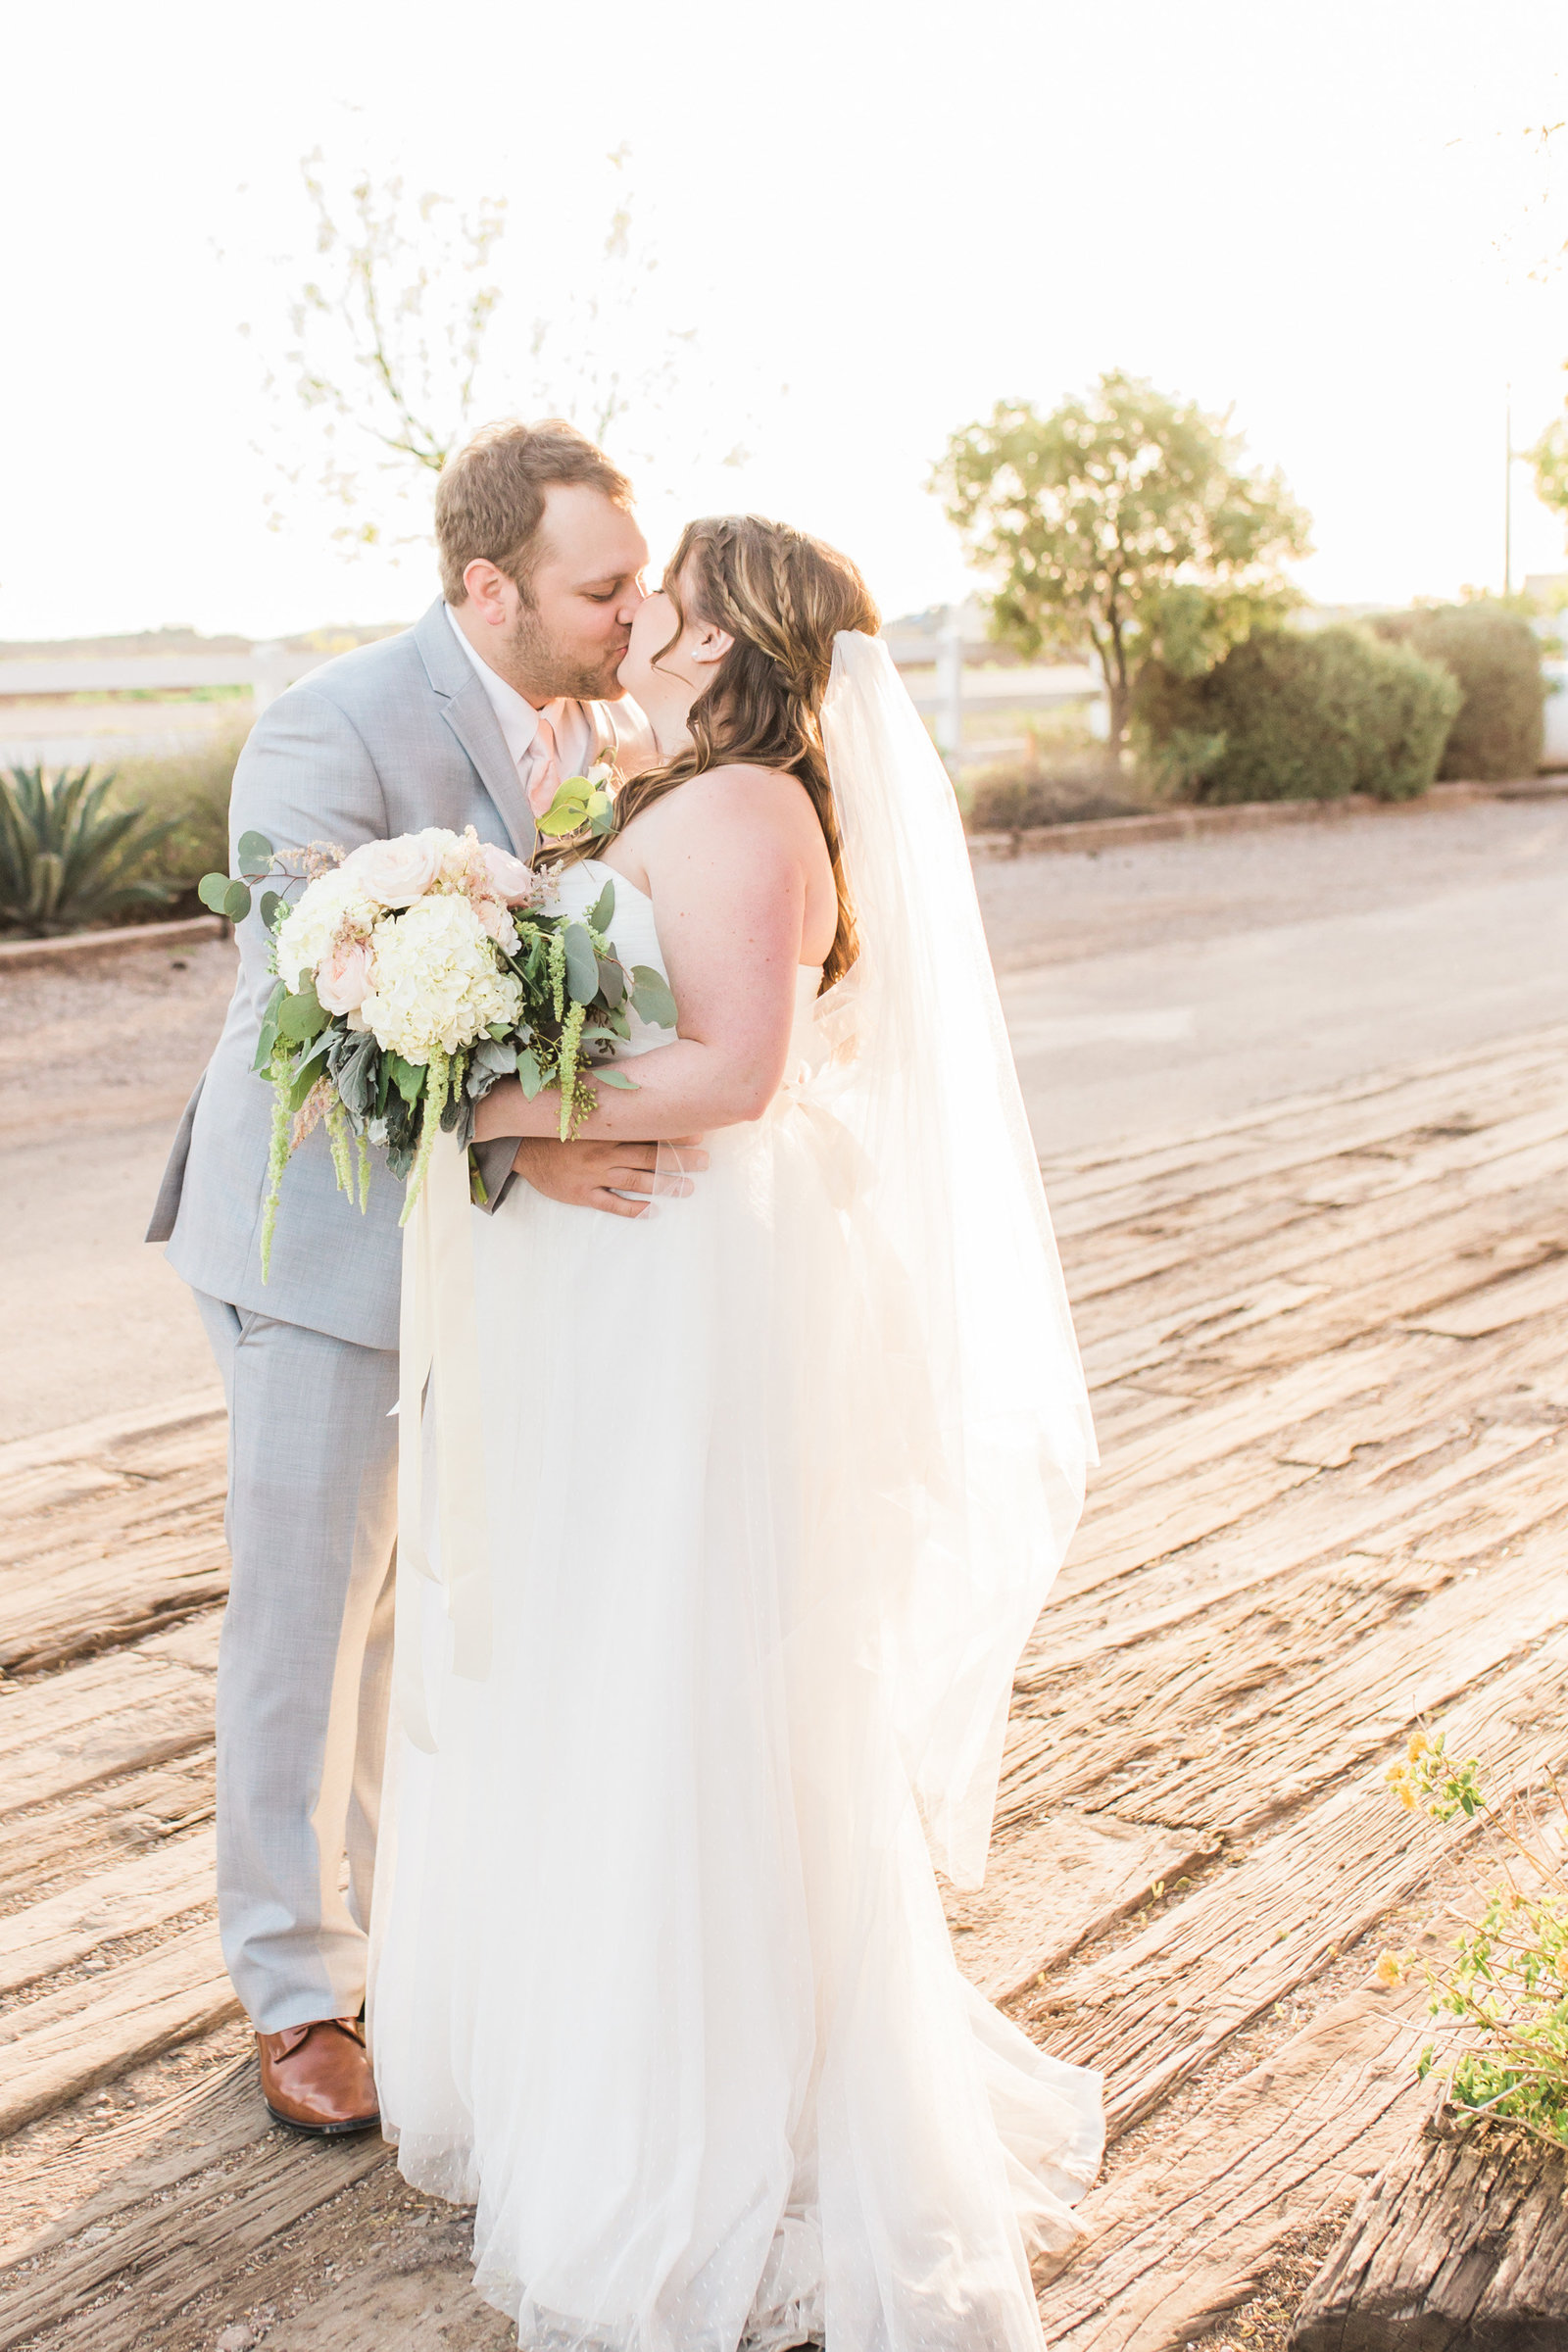 Florence Windmill Winery Rustic Elegant Wedding Photo with Bride and Groom Kissing | Tucson Wedding Photographer | West End Photography